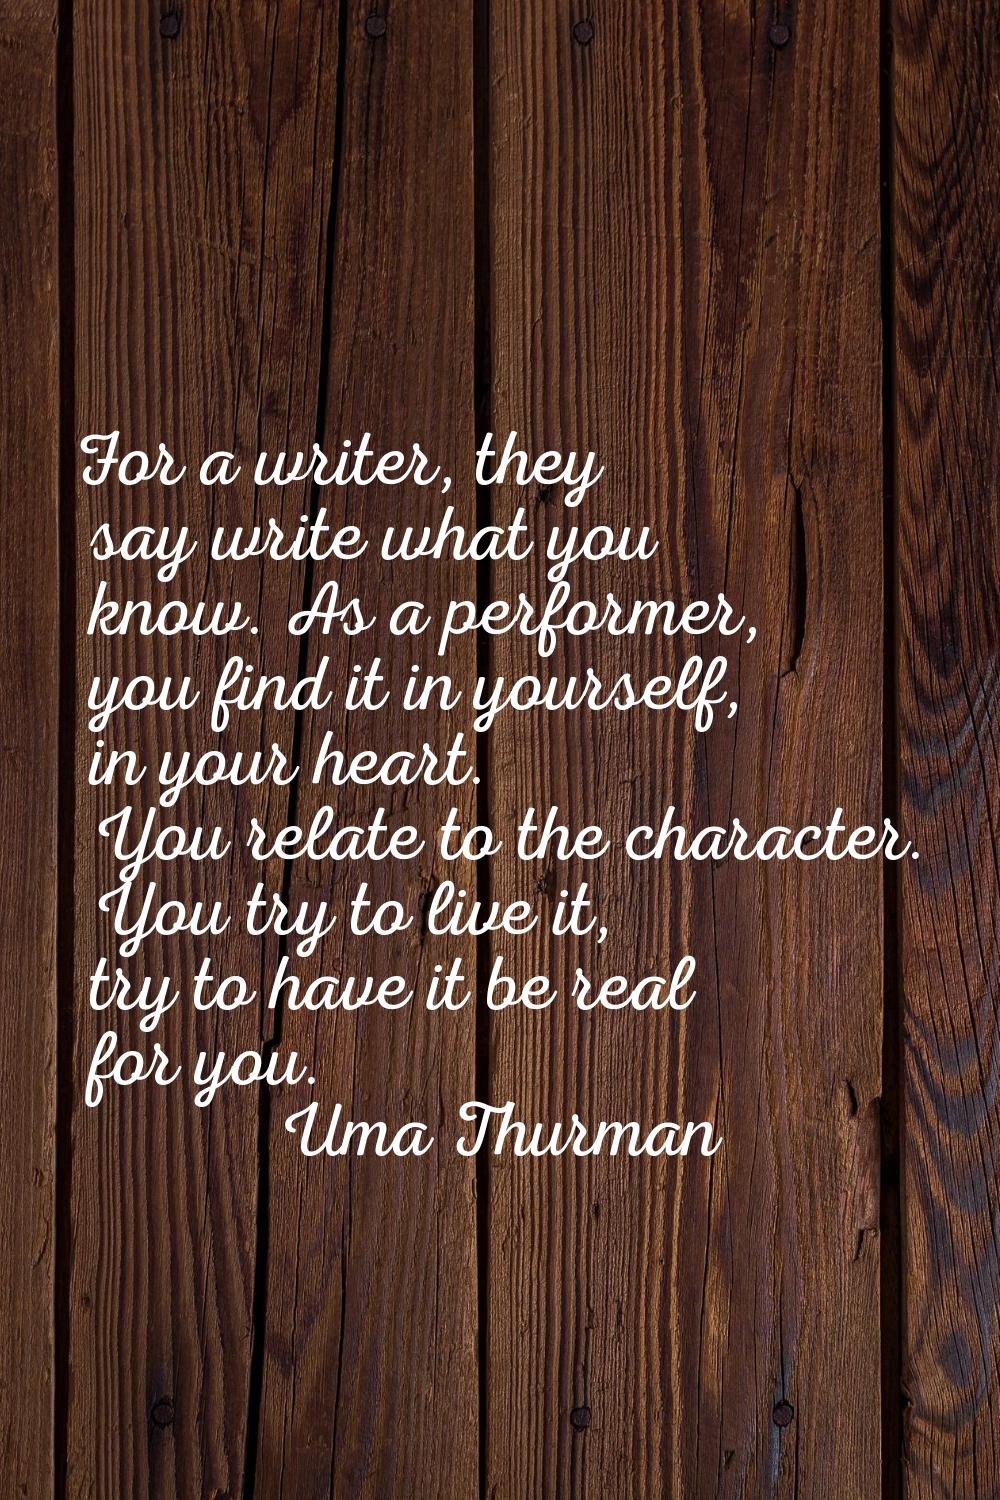 For a writer, they say write what you know. As a performer, you find it in yourself, in your heart.